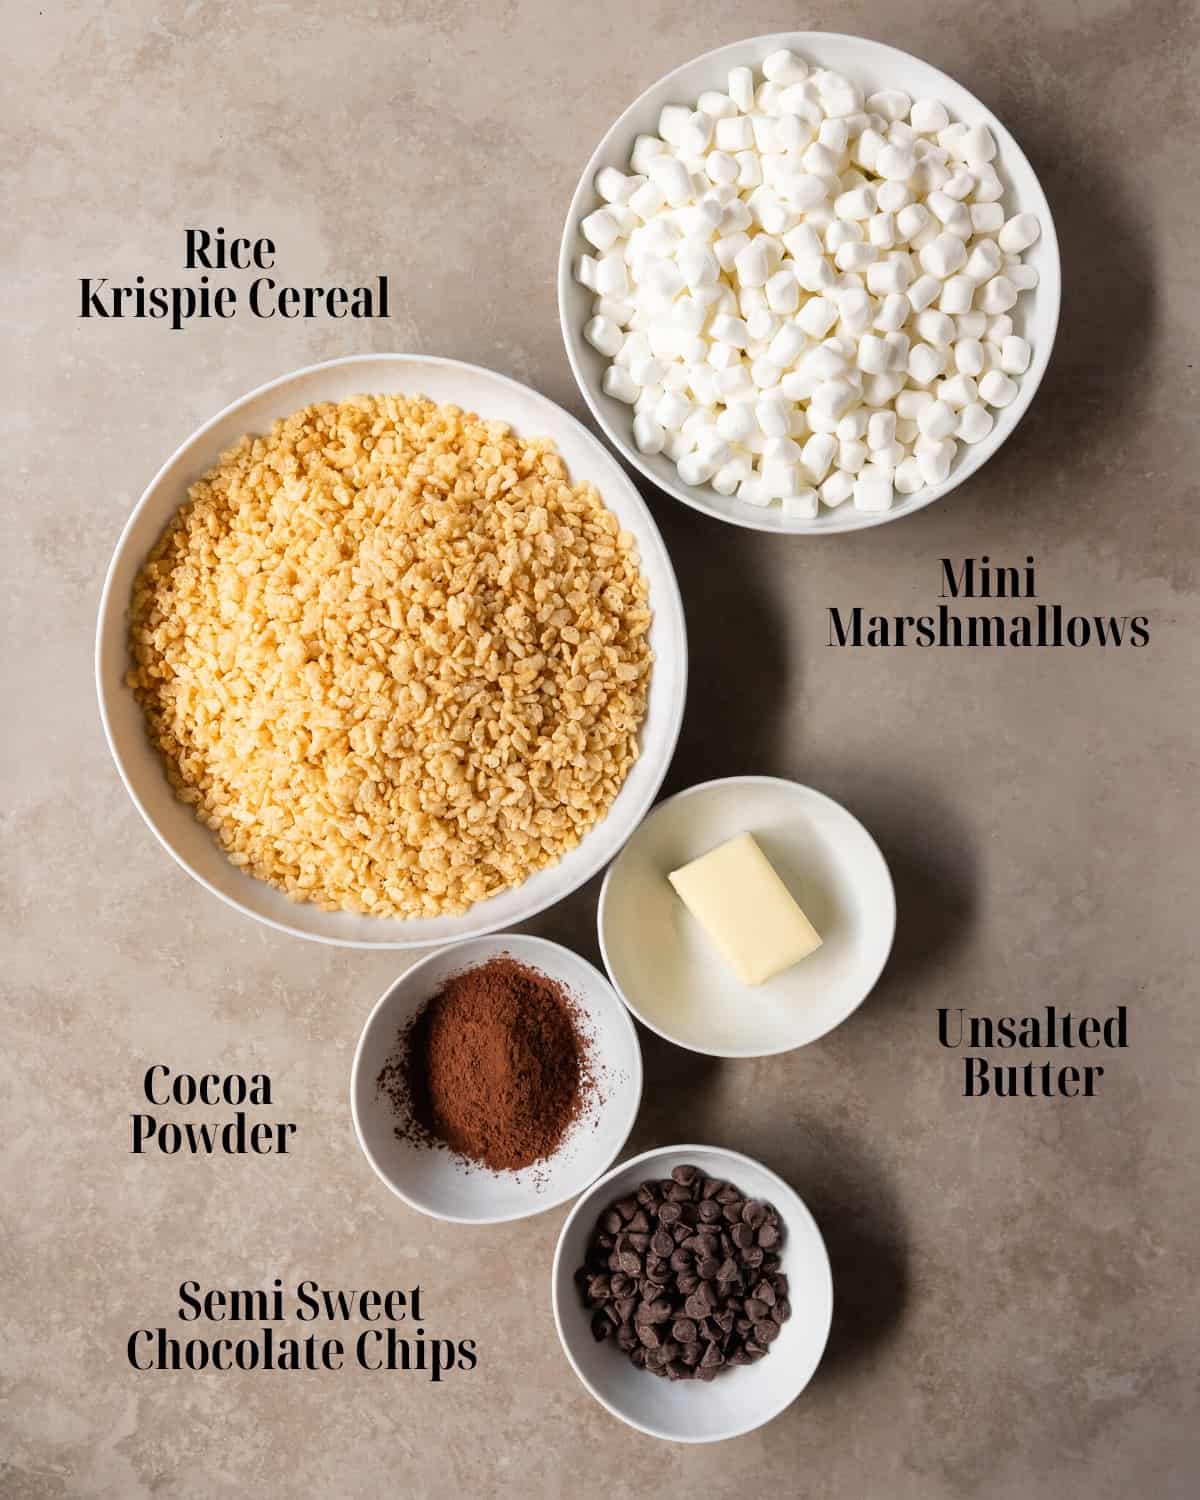 Gather rice krispie cereal, butter, mini marshmallows, cocoa powder, chocolate chips and flaky salt.